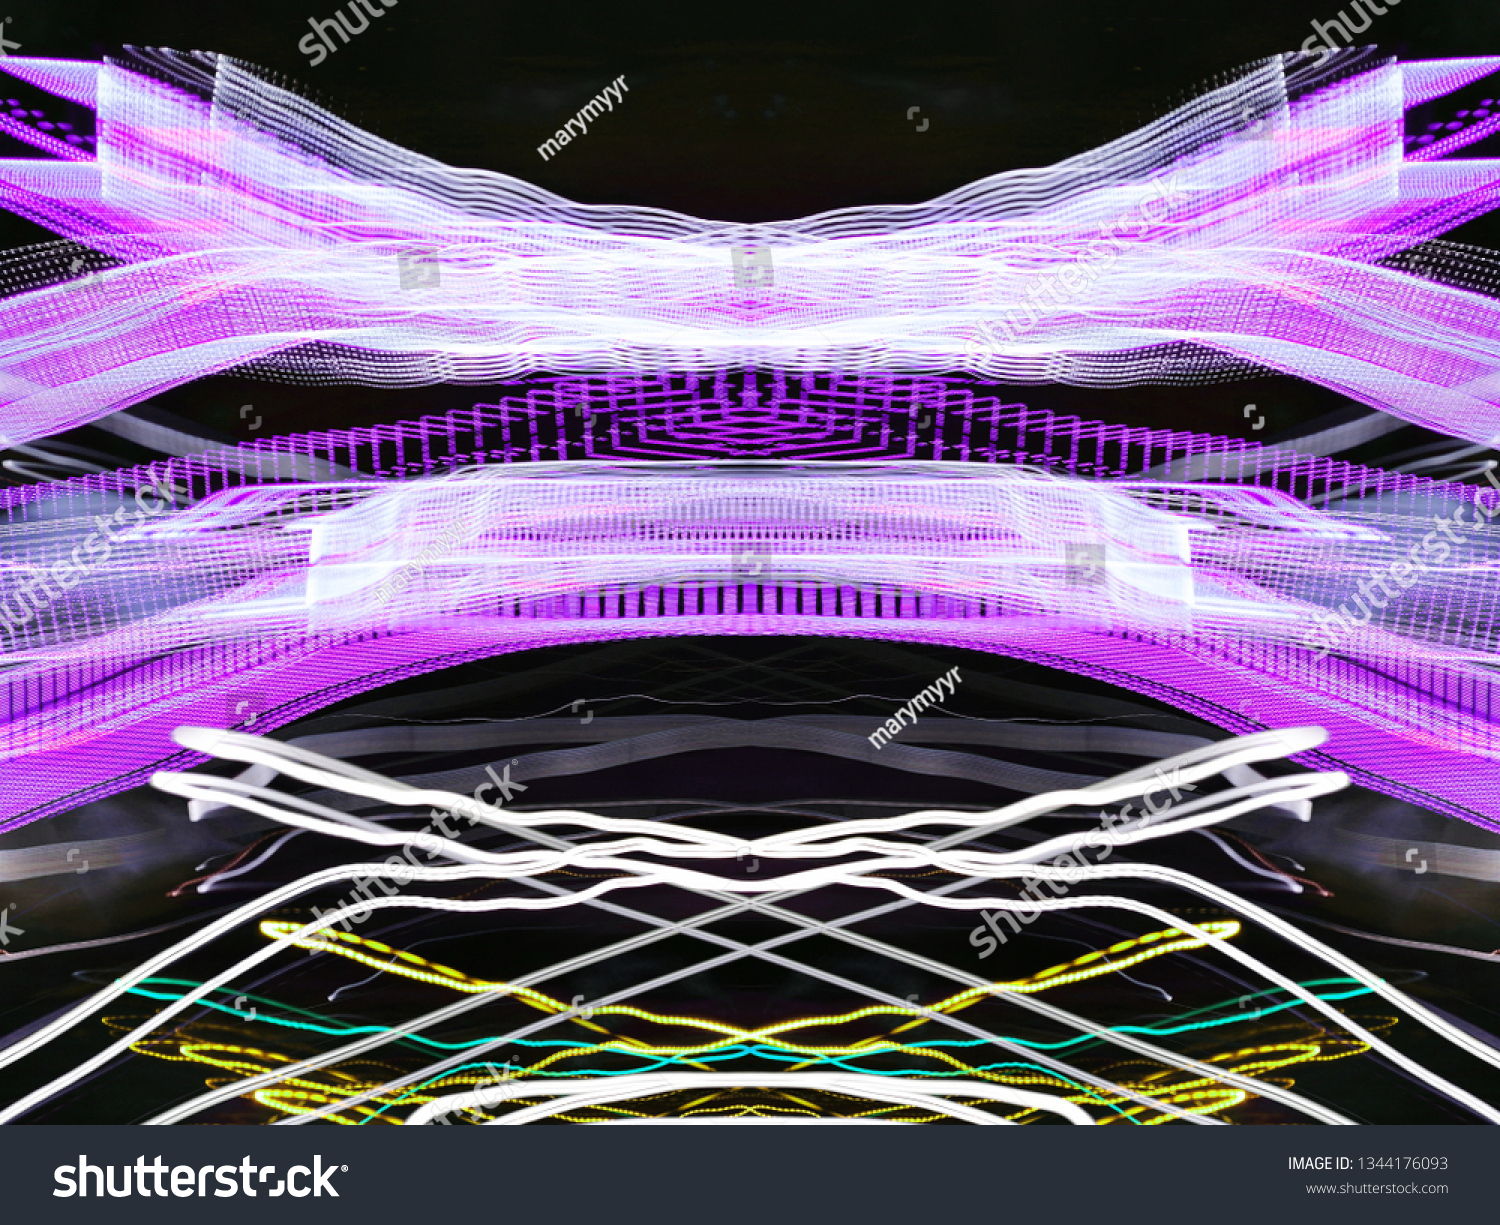 Symmetry and reflection. Neon glow. Abstract blurred background. Texture. Colorful pattern. #1344176093